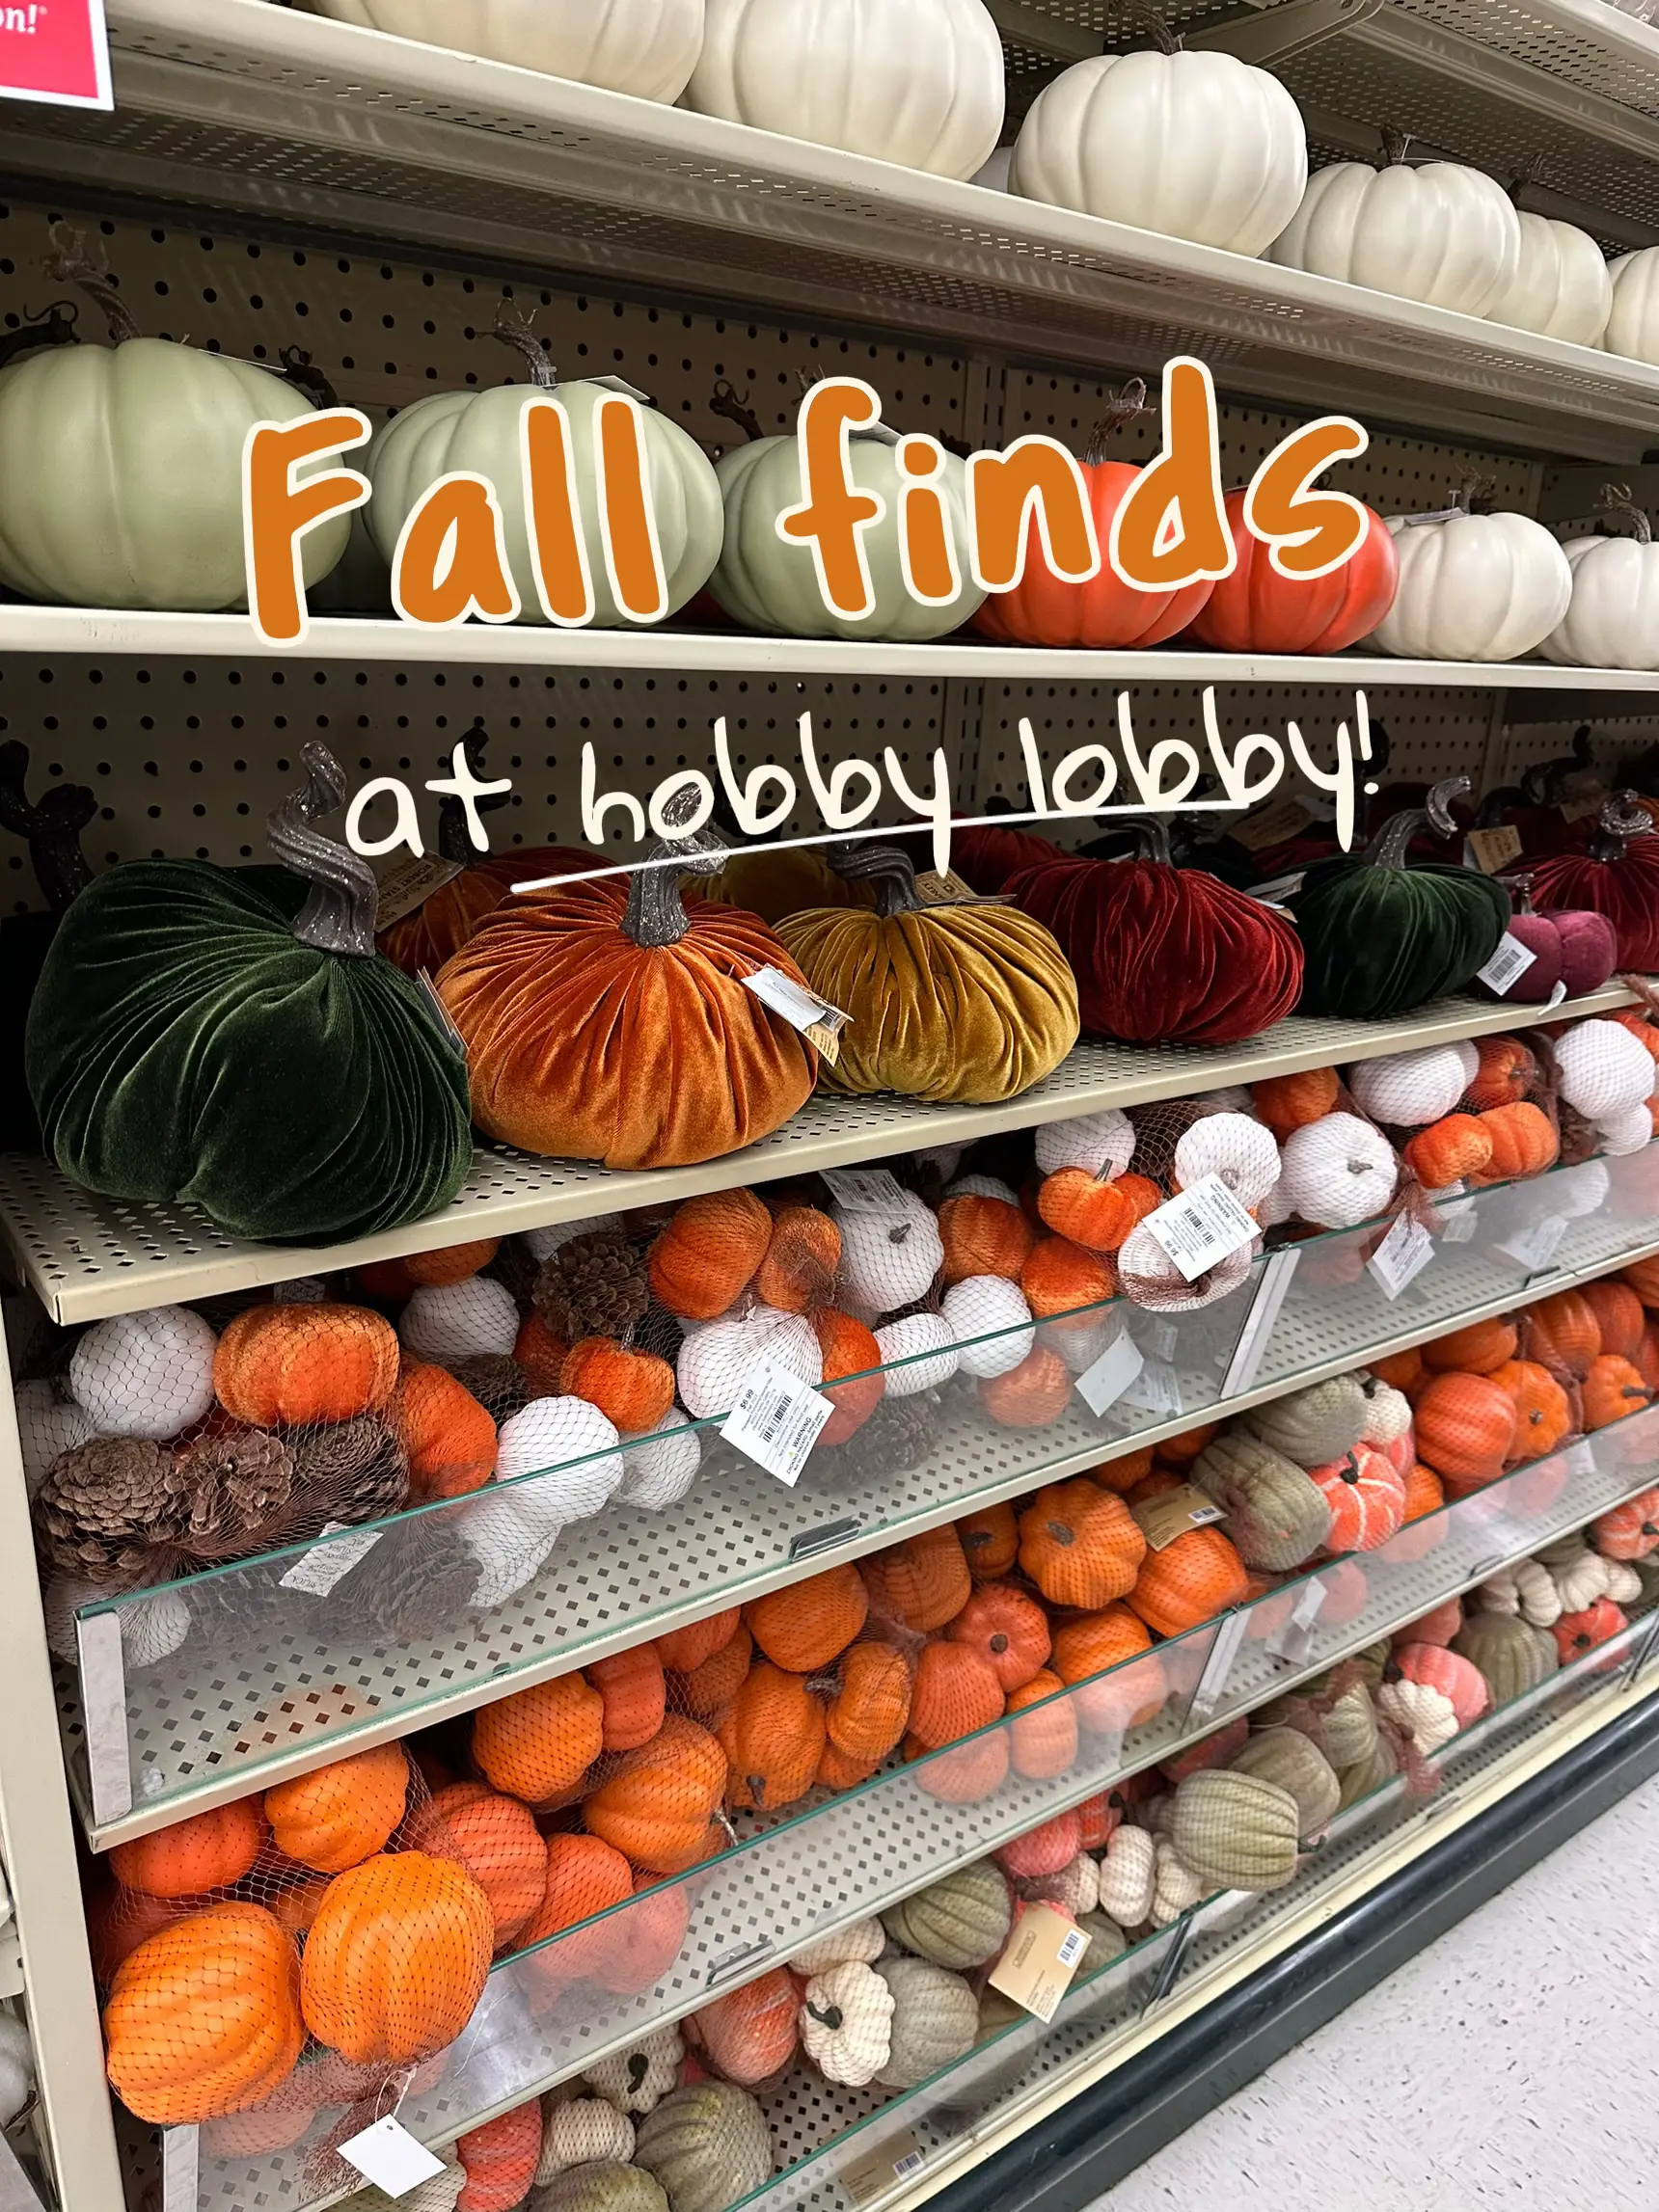 My fave hobby lobby fall finds (40% off!)🎃